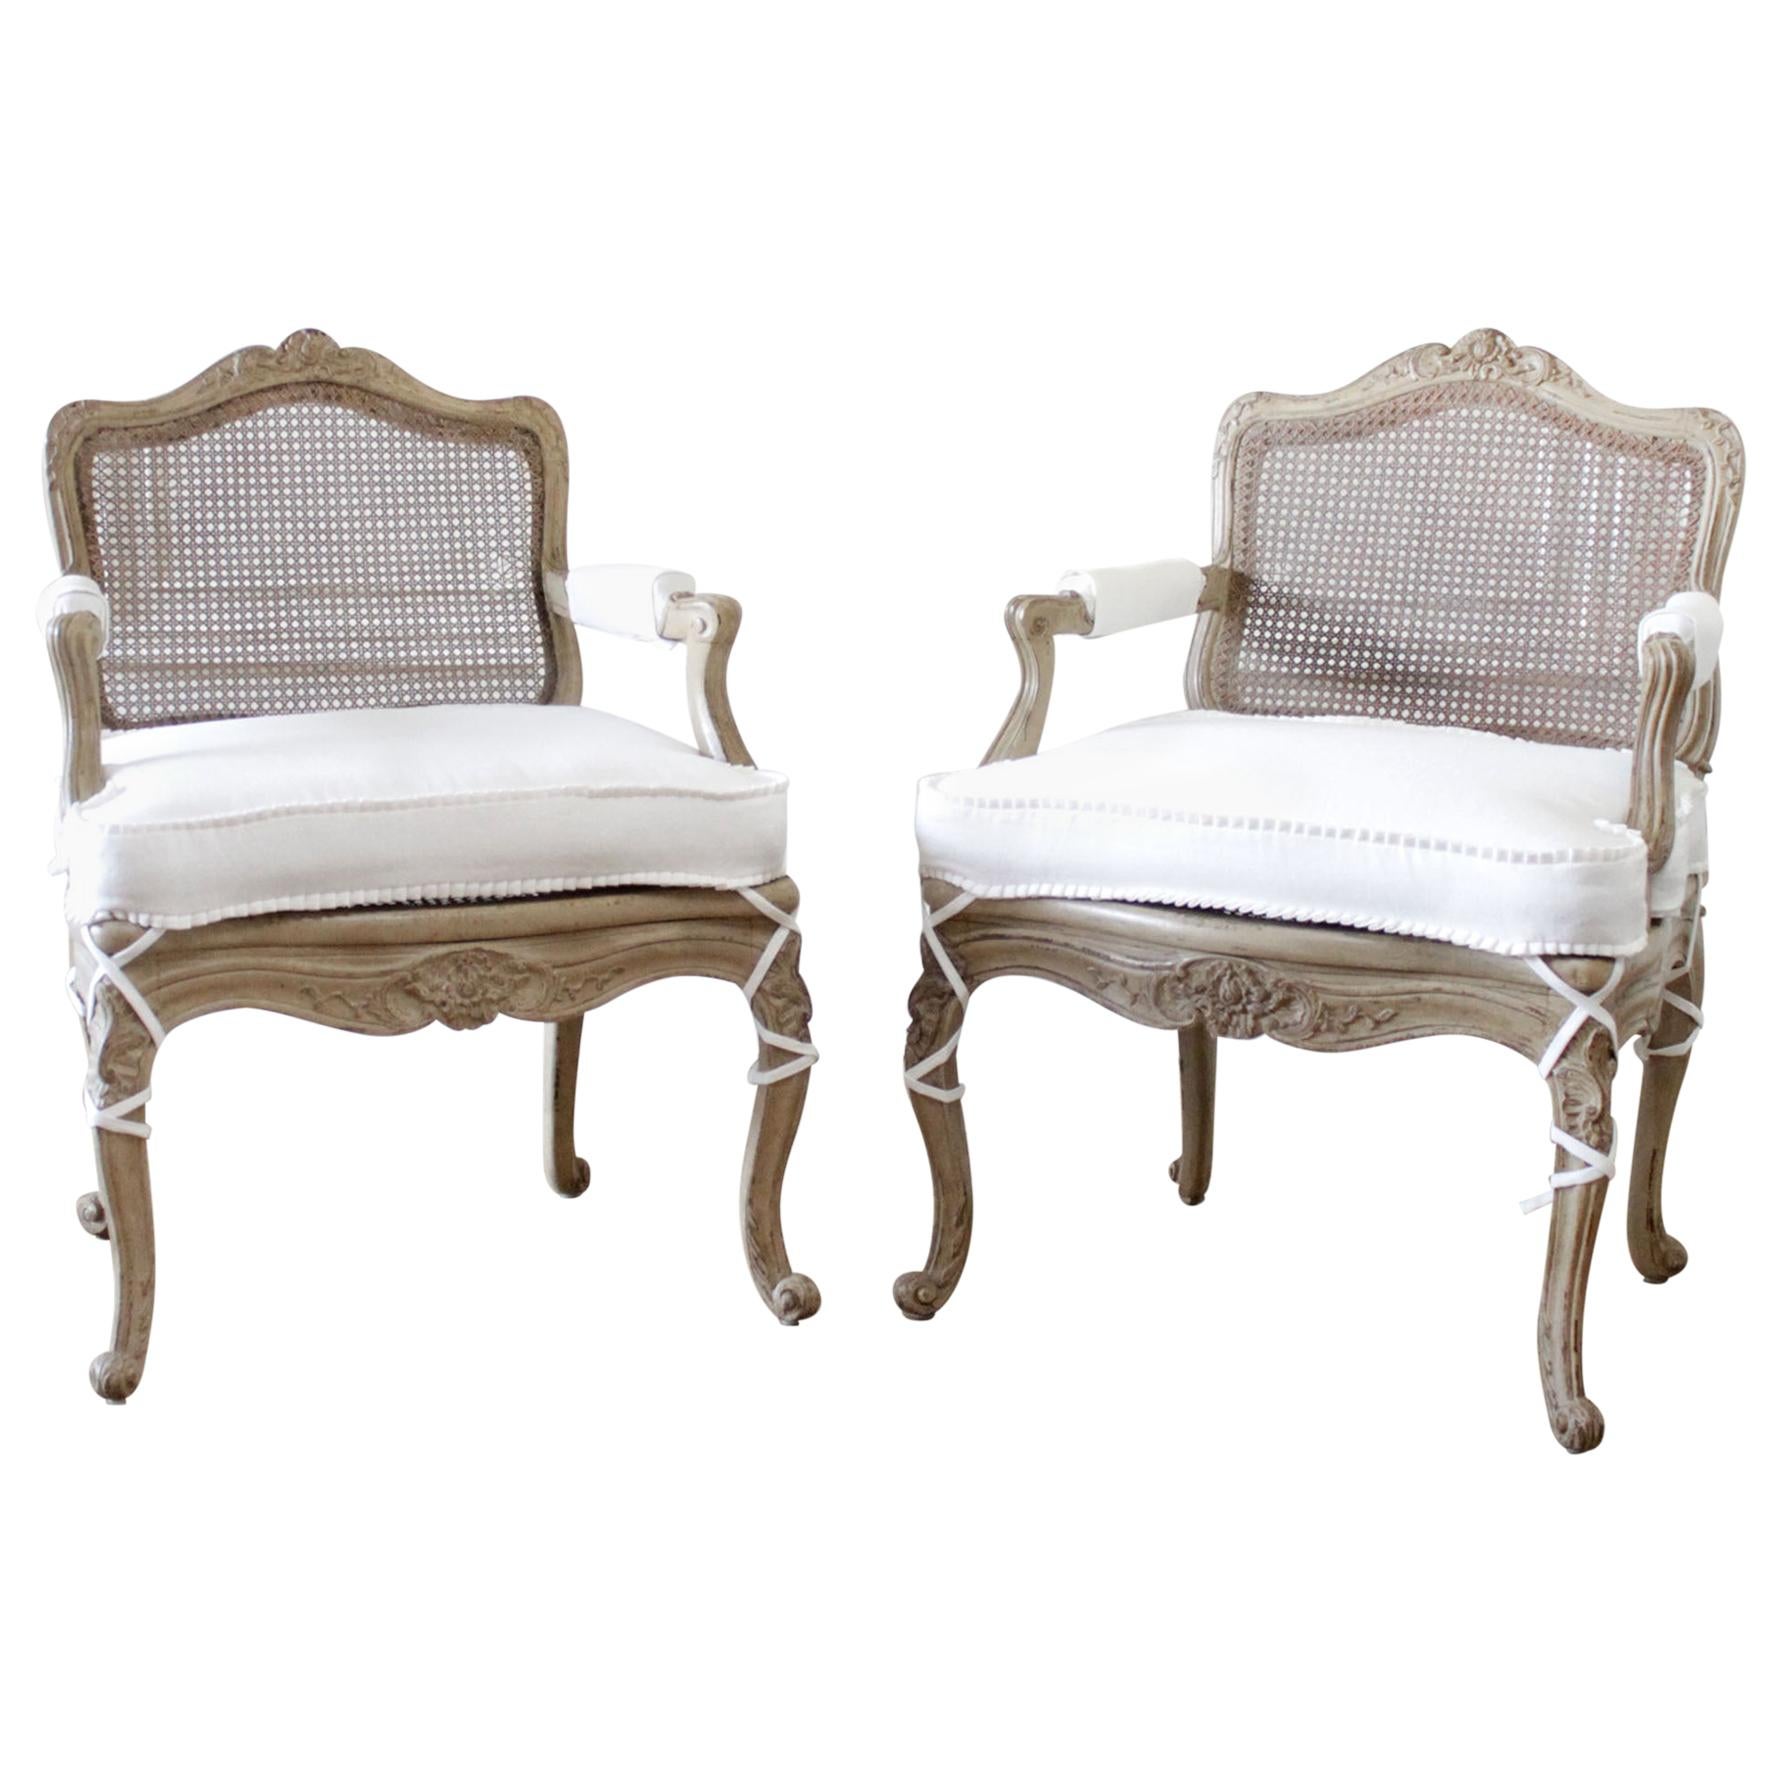 Pair of Antique French Arm Chairs in Original Painted Finish and White Linen